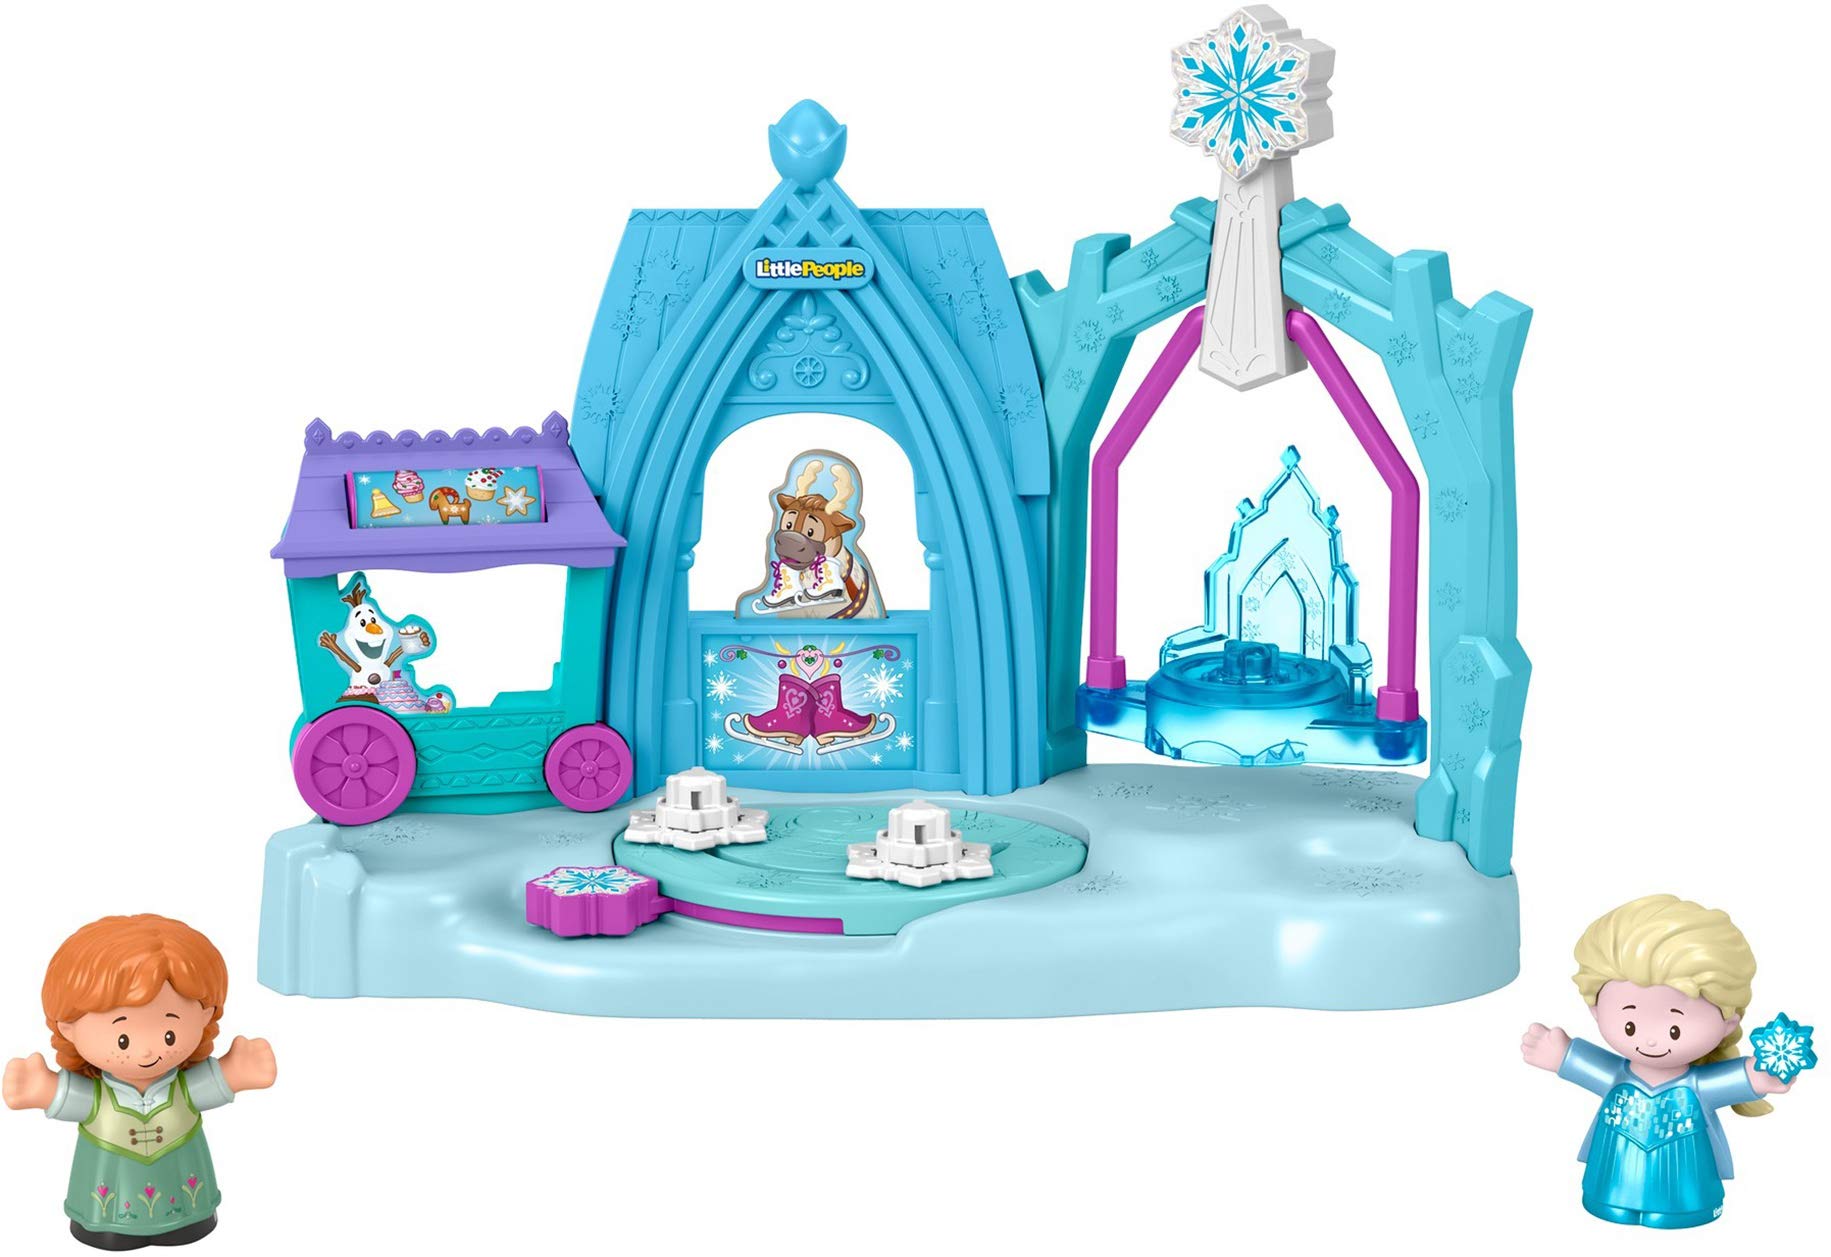 Fisher-Price Disney Frozen Arendelle Winter Wonderland by Little People, ice skating playset with Anna and Elsa figures for toddlers and preschool kids